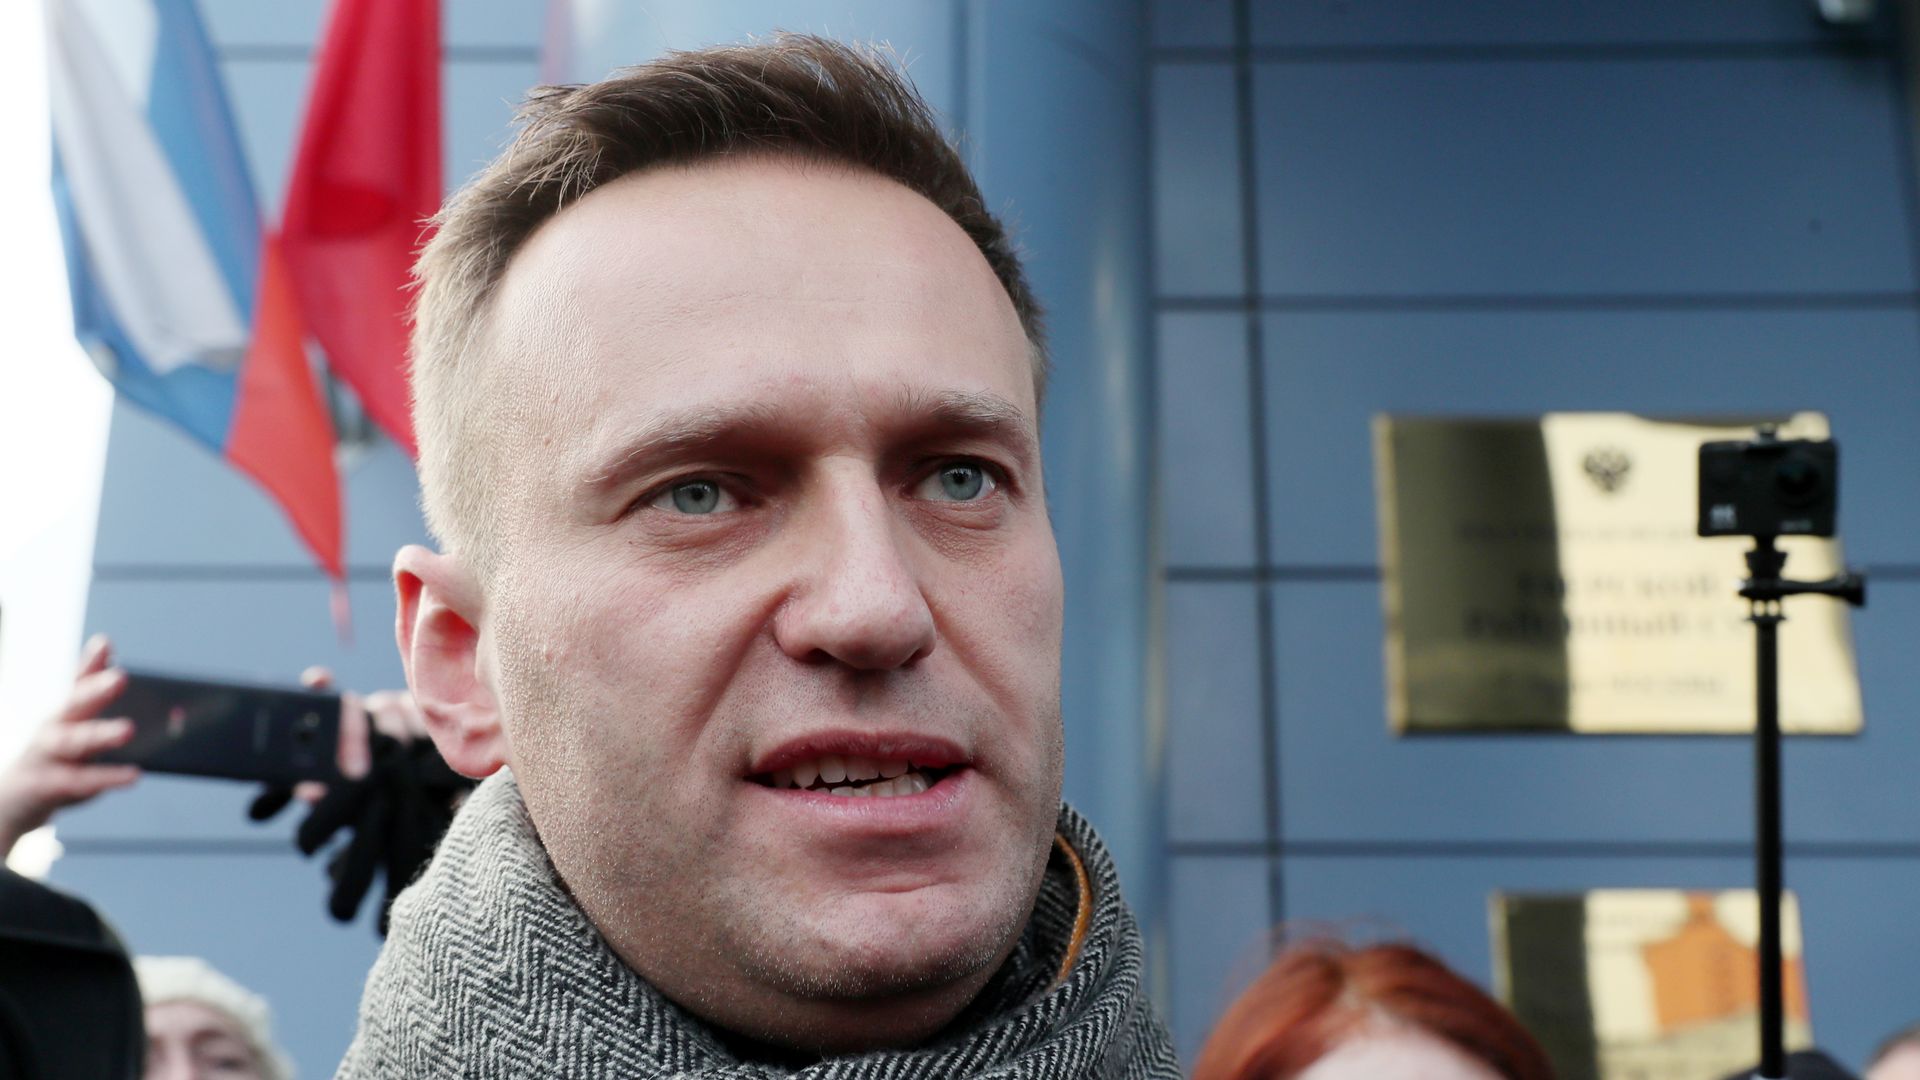 Opposition activist Alexei Navalny is pictured outside Moscow's Meshchansky District court